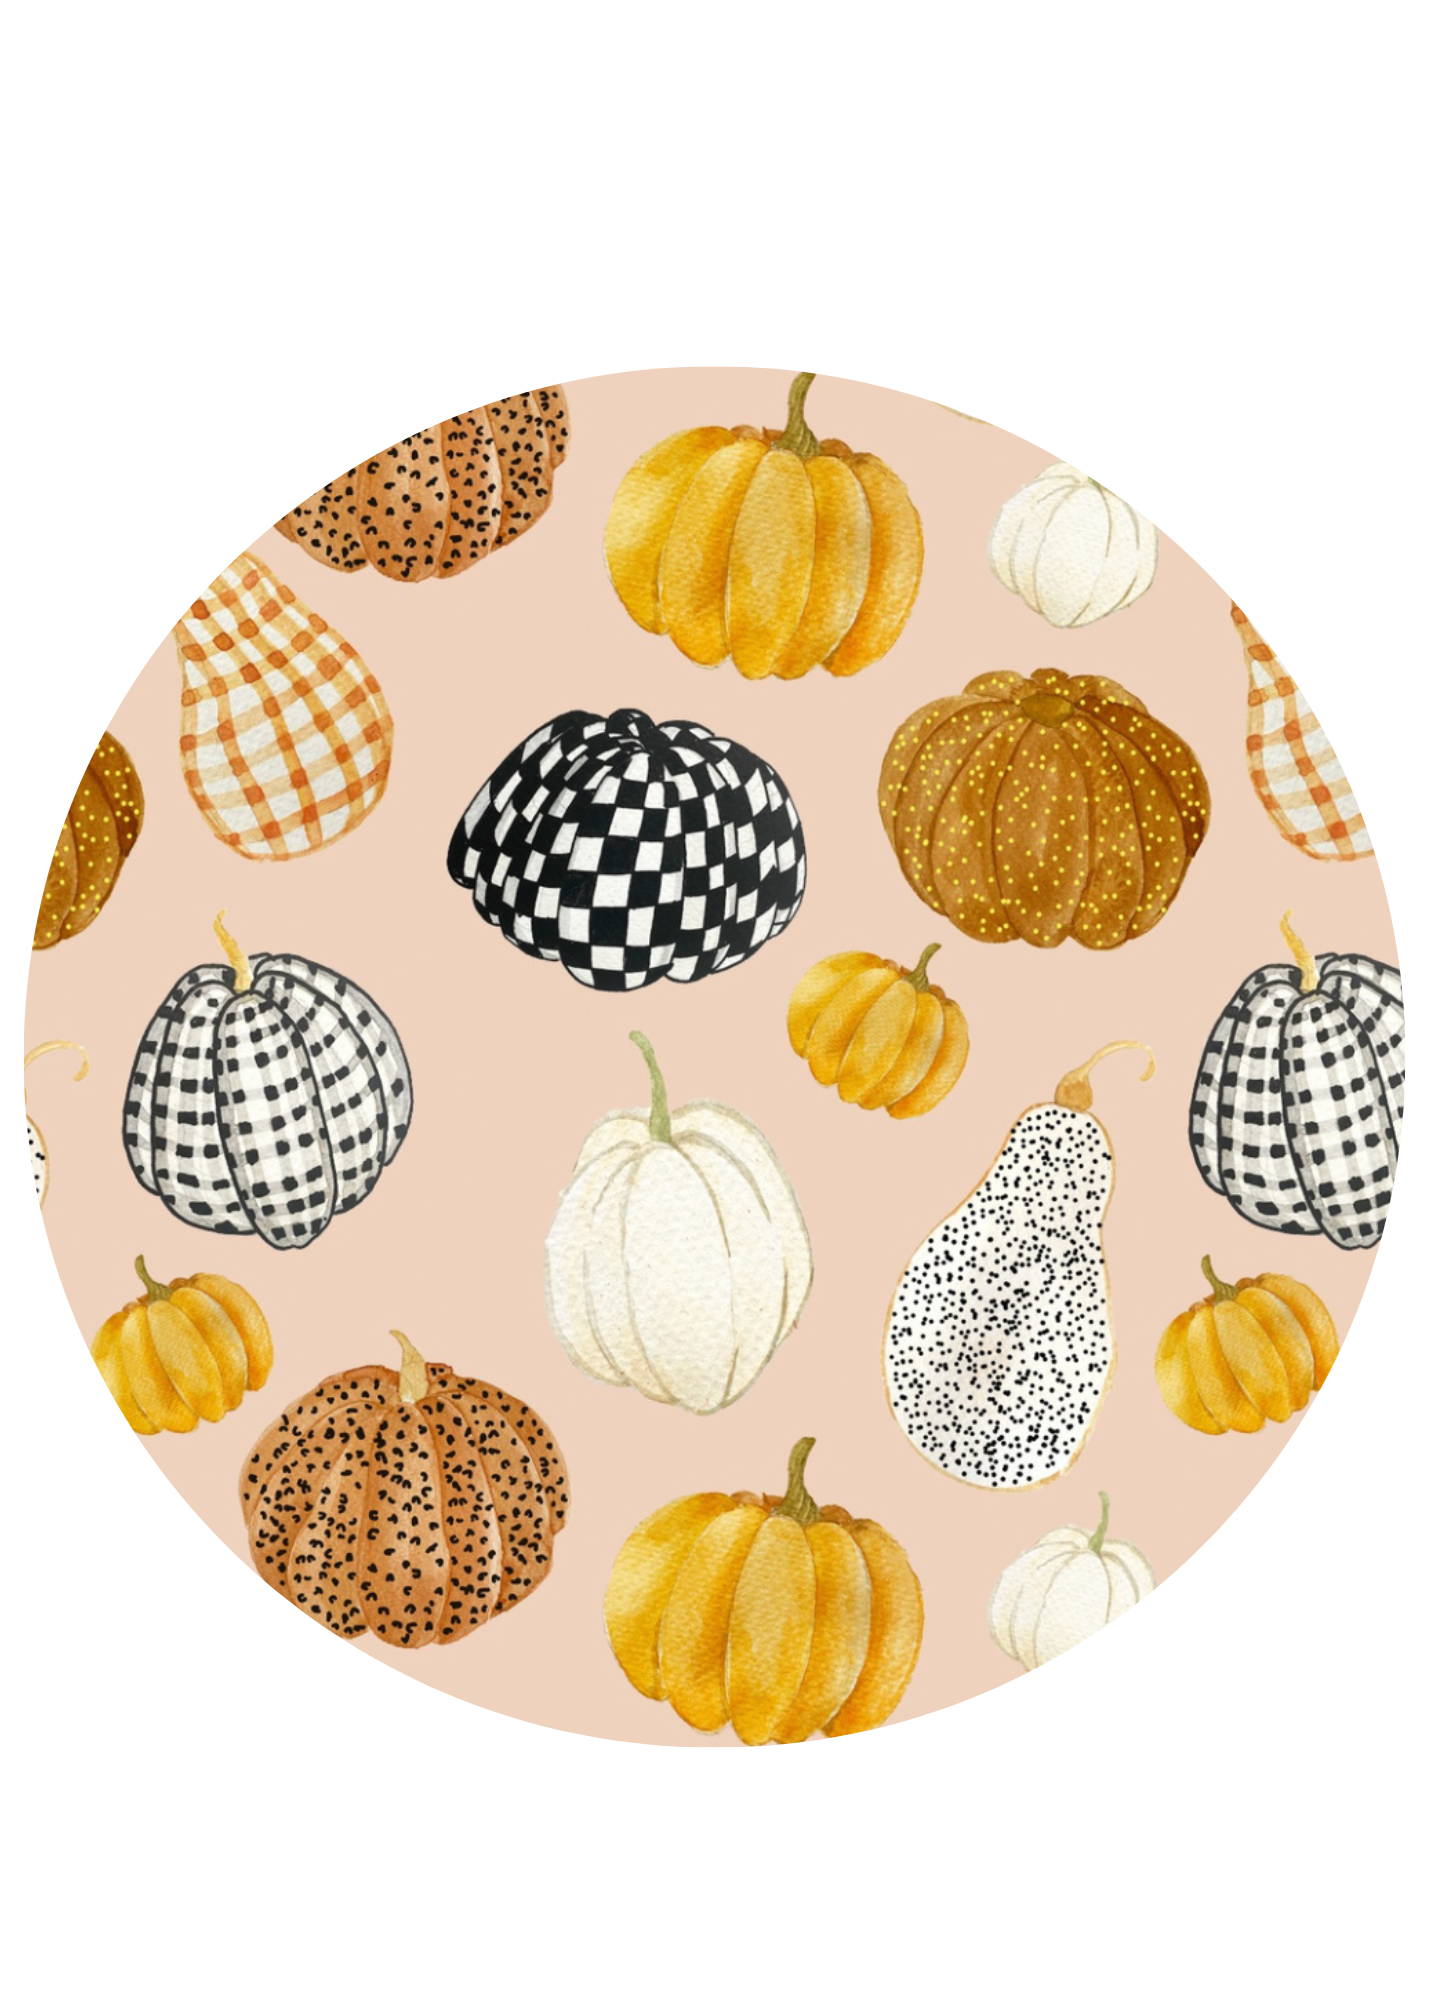 Patterned Pumpkins Hair Bow